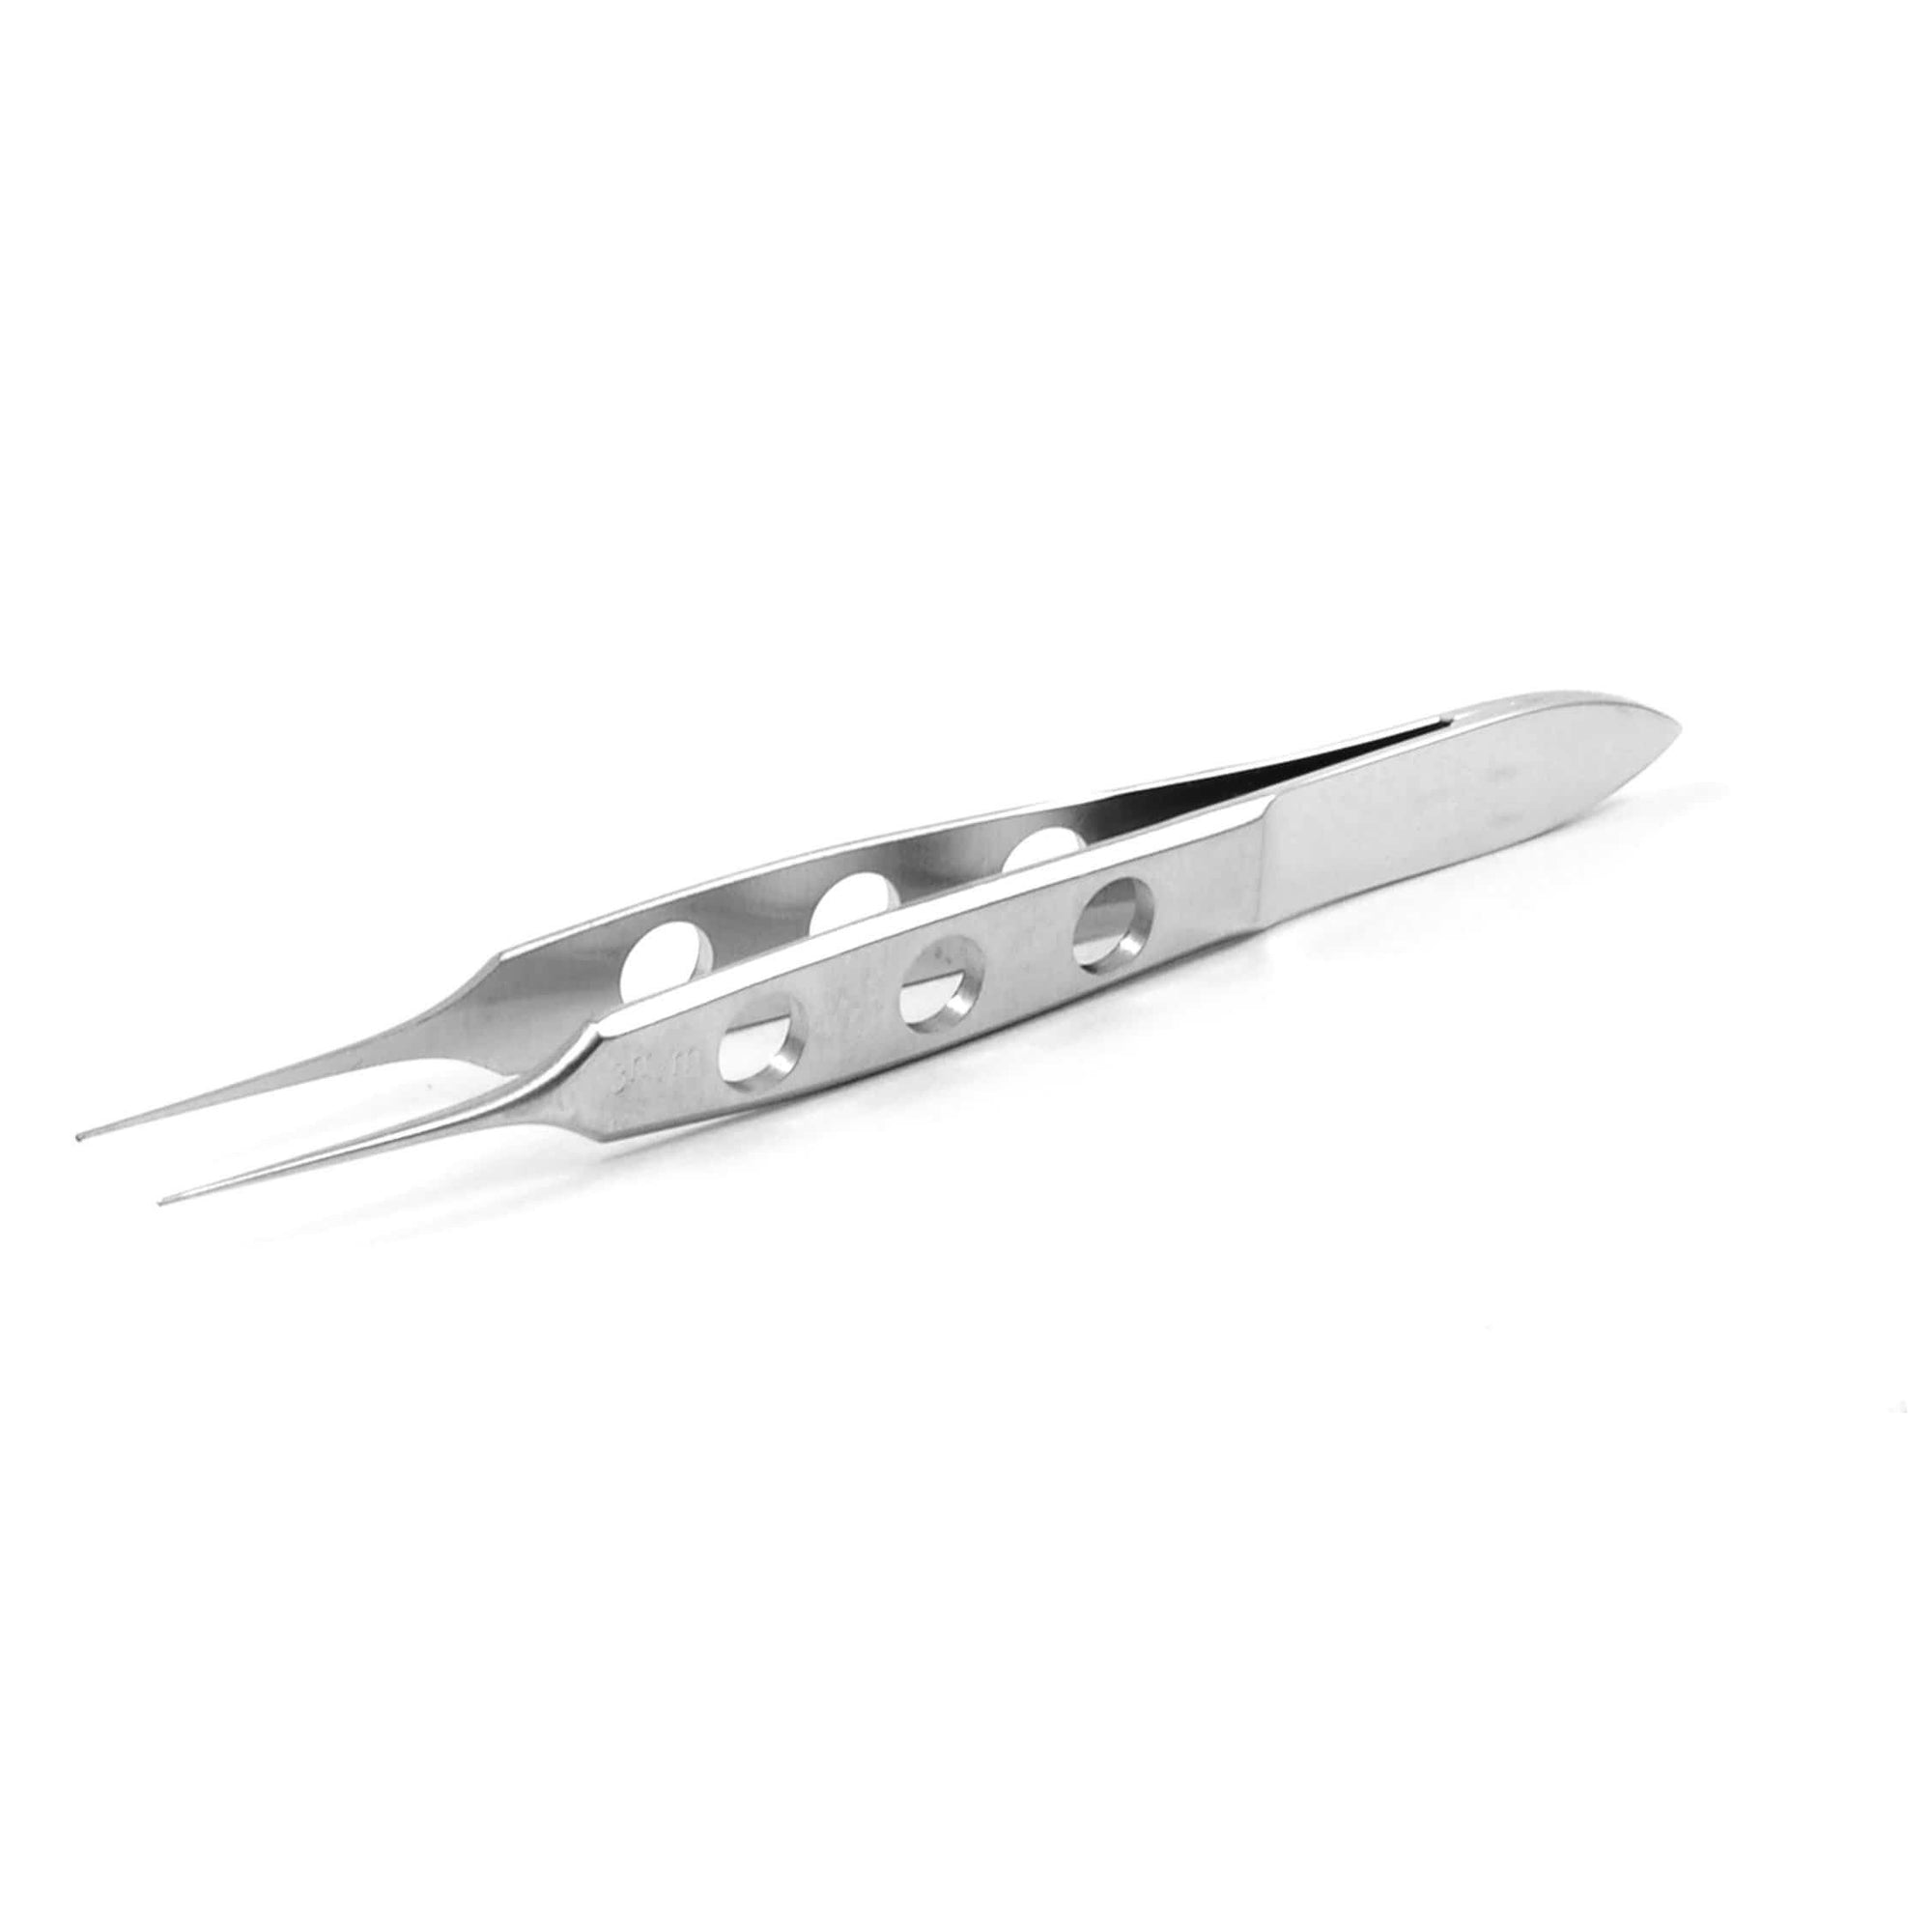 Armo Surgical Instruments Armo Bishop Harmon Forceps